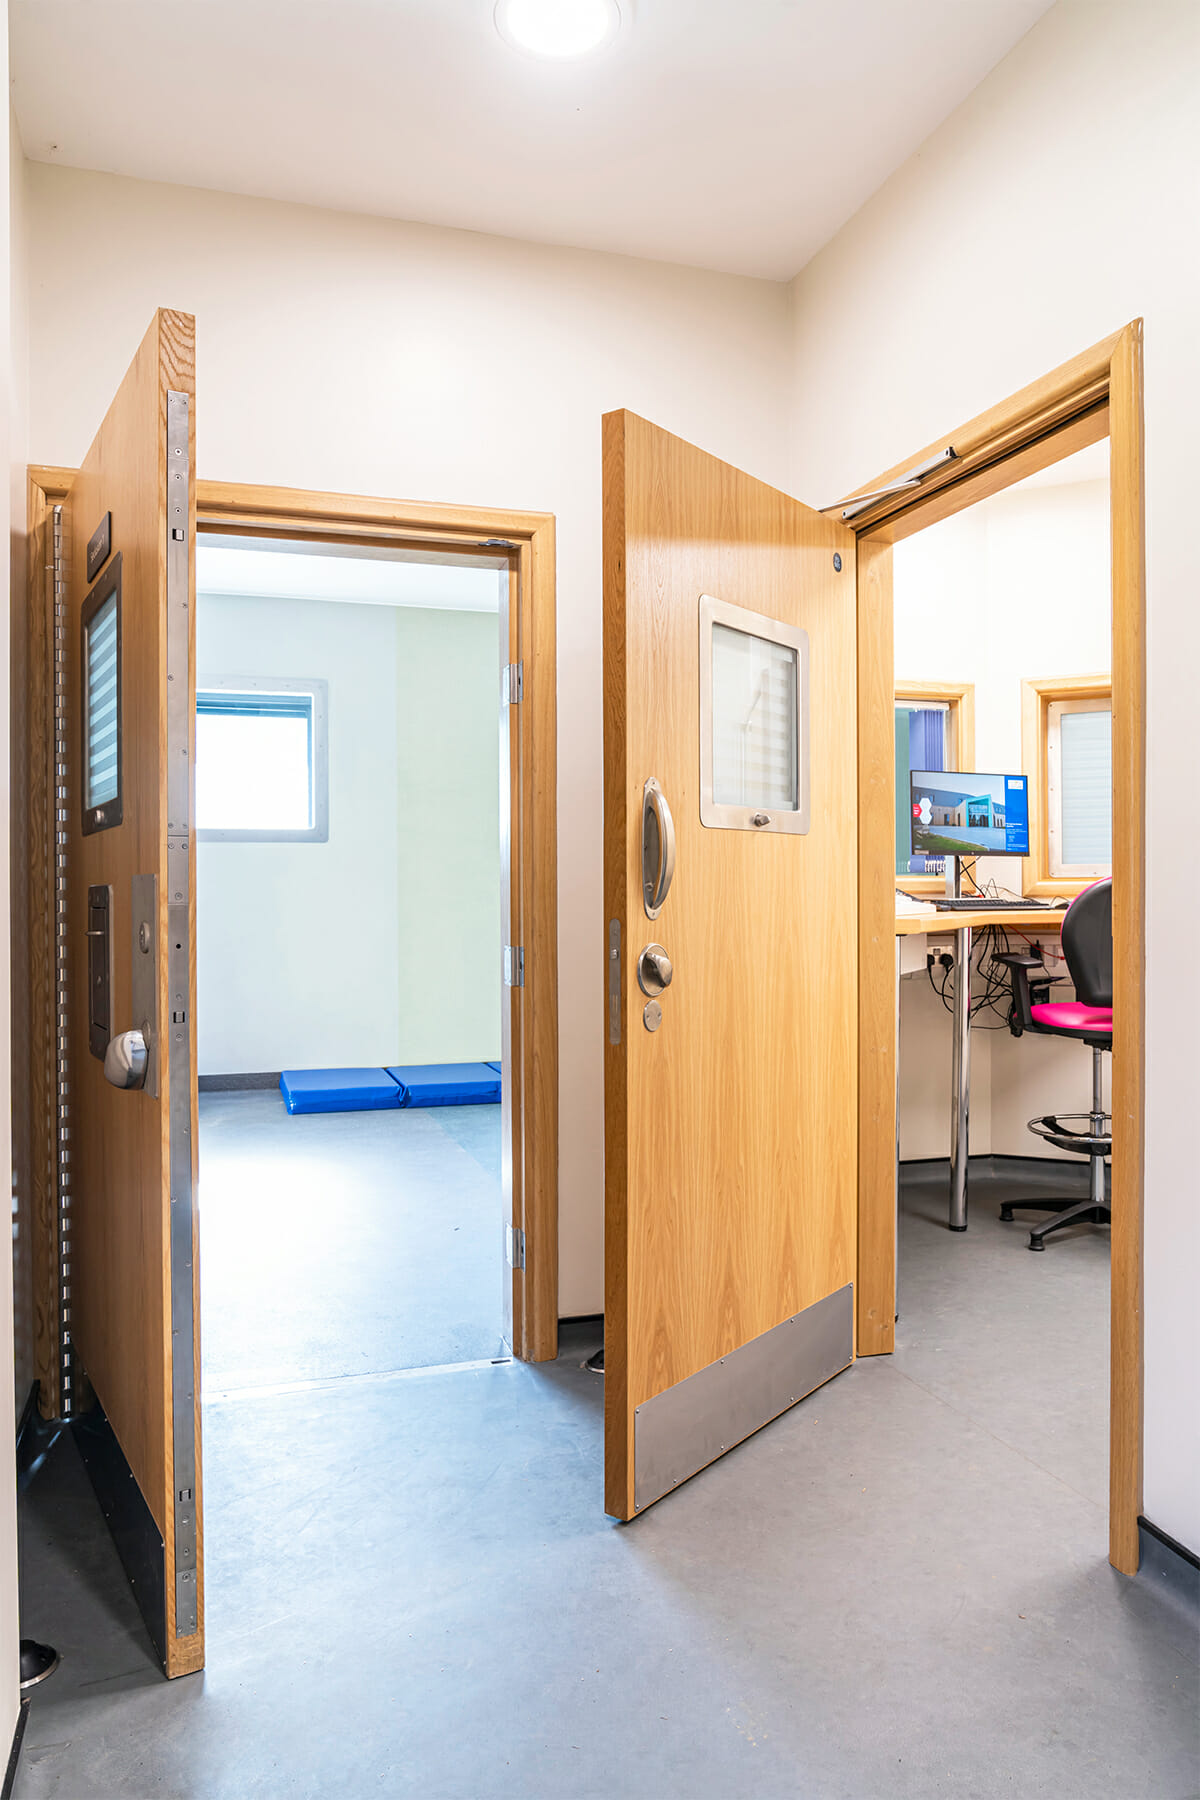 Anti-Ligature Doors and Products for Prisons and Custodial Facilities by Kingsway Group.